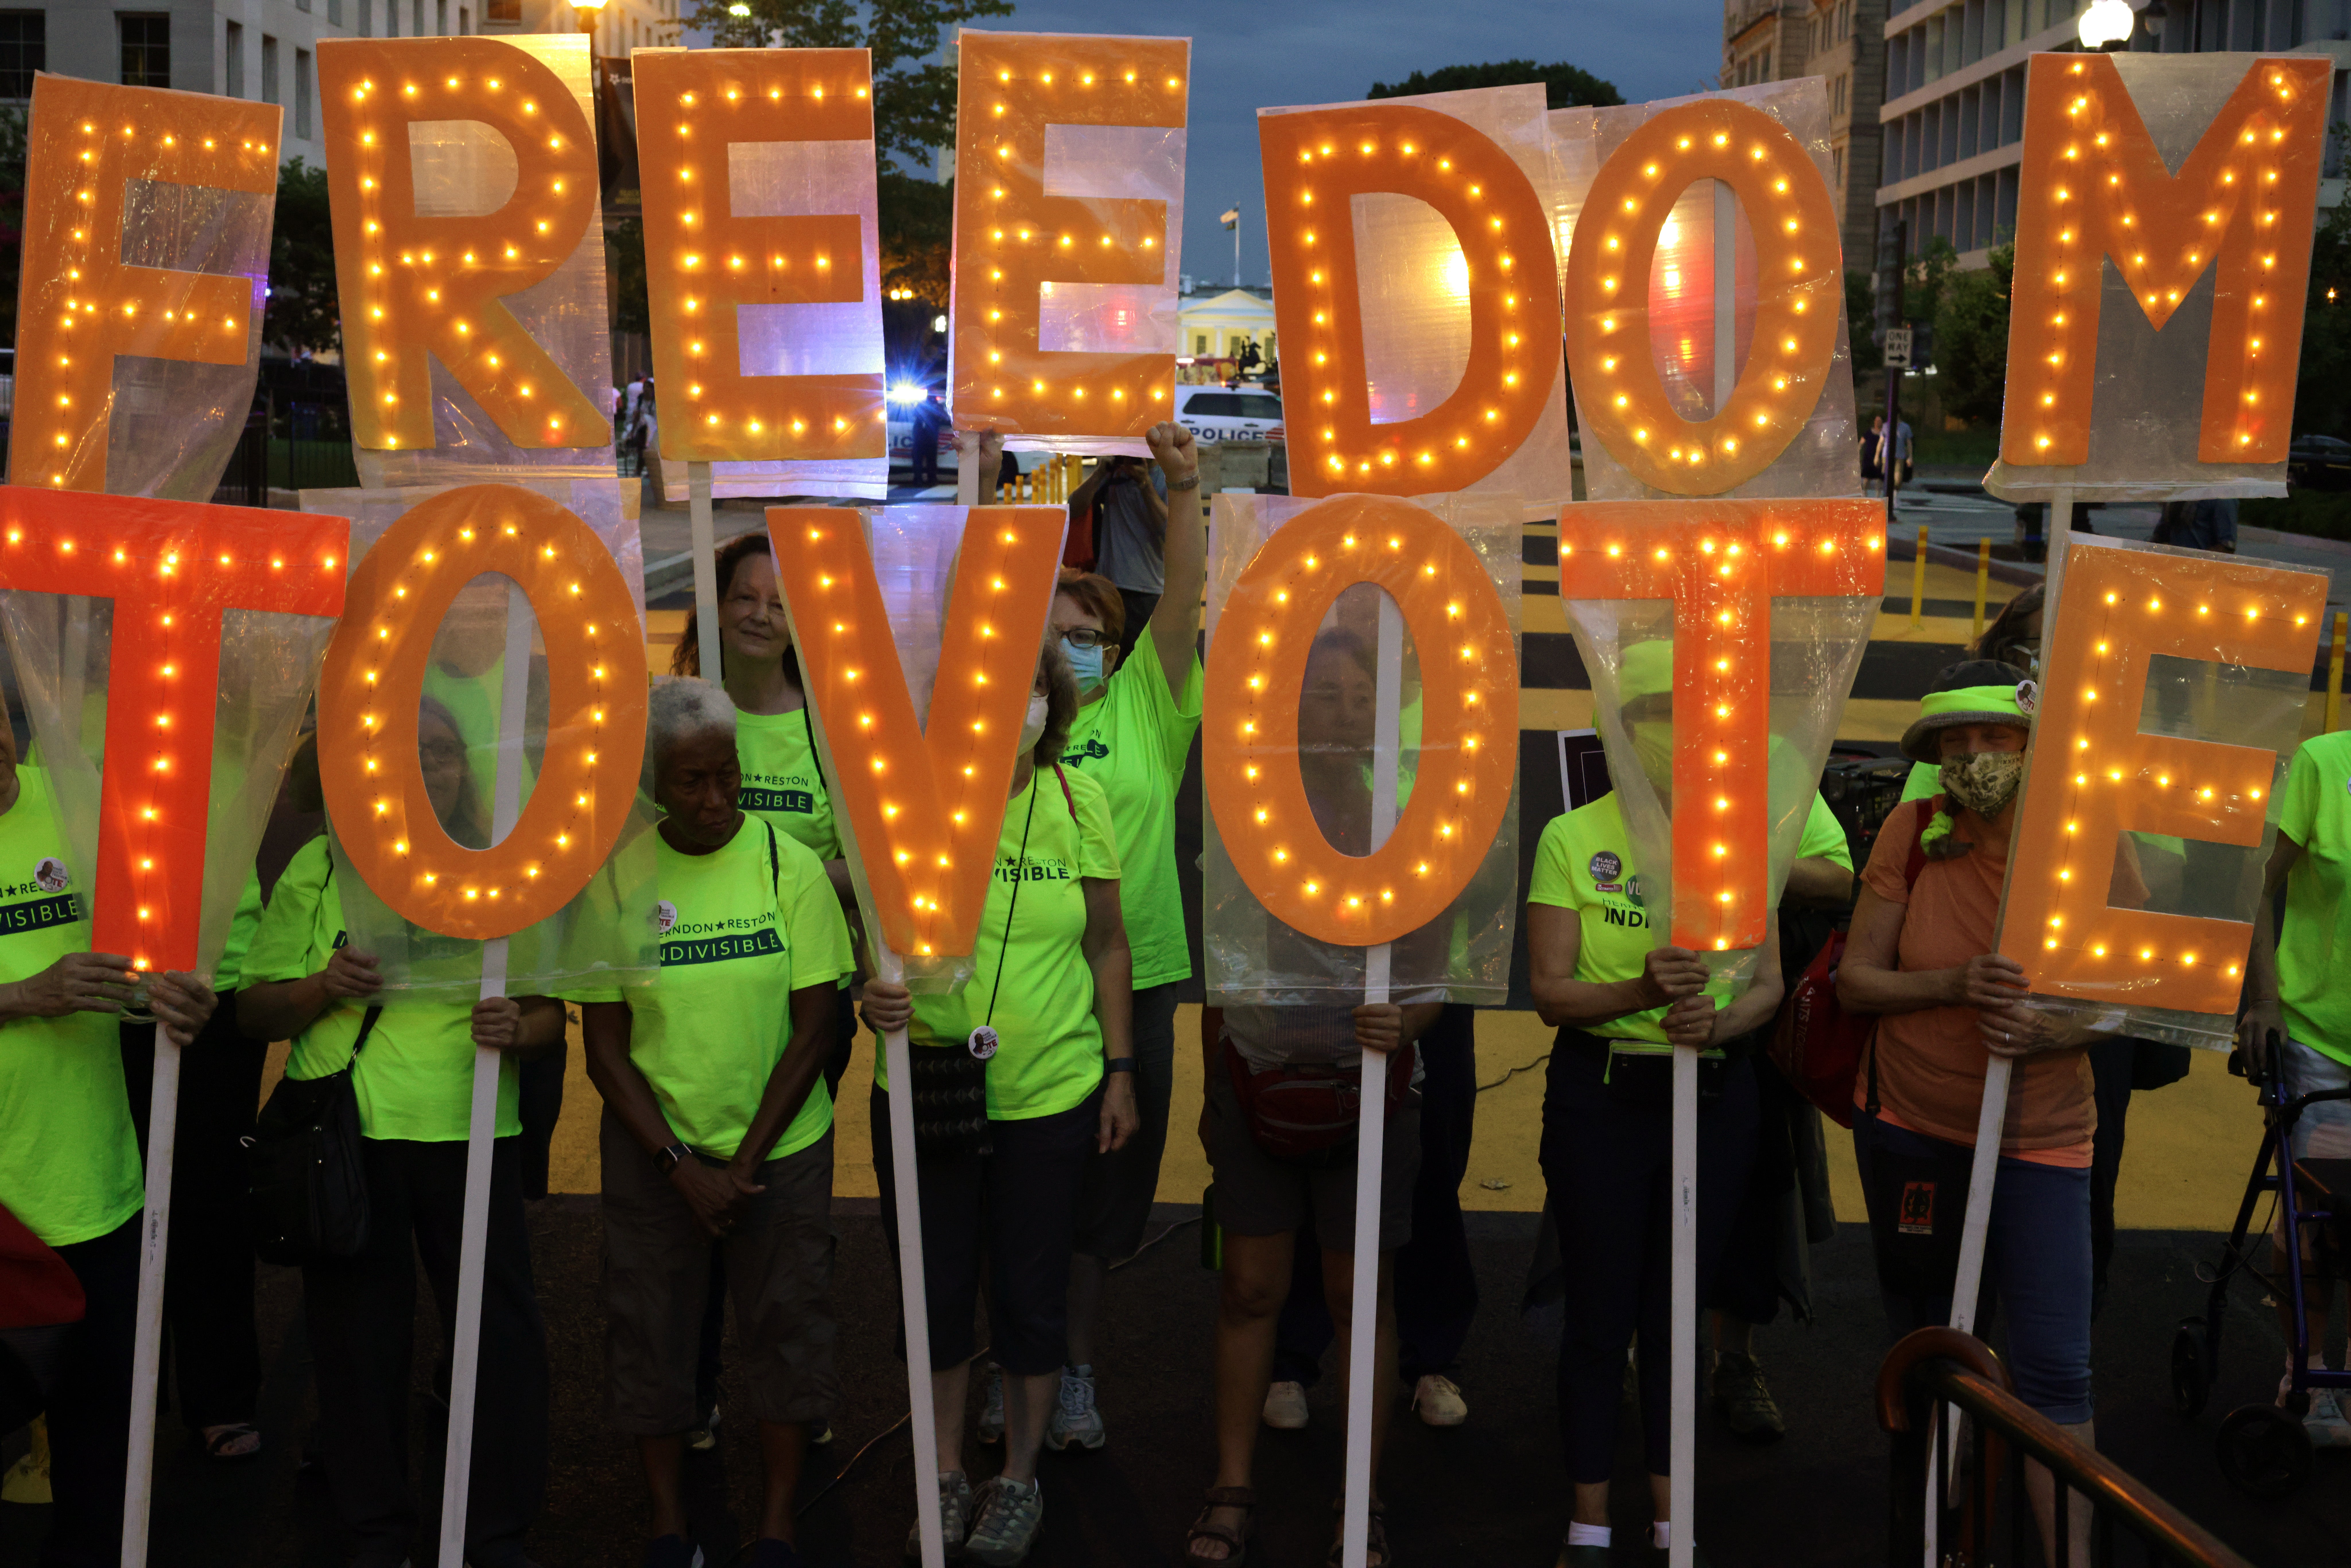 Voting rights activists march in Black Lives Matter Plaza in Washington DC on 17 July.